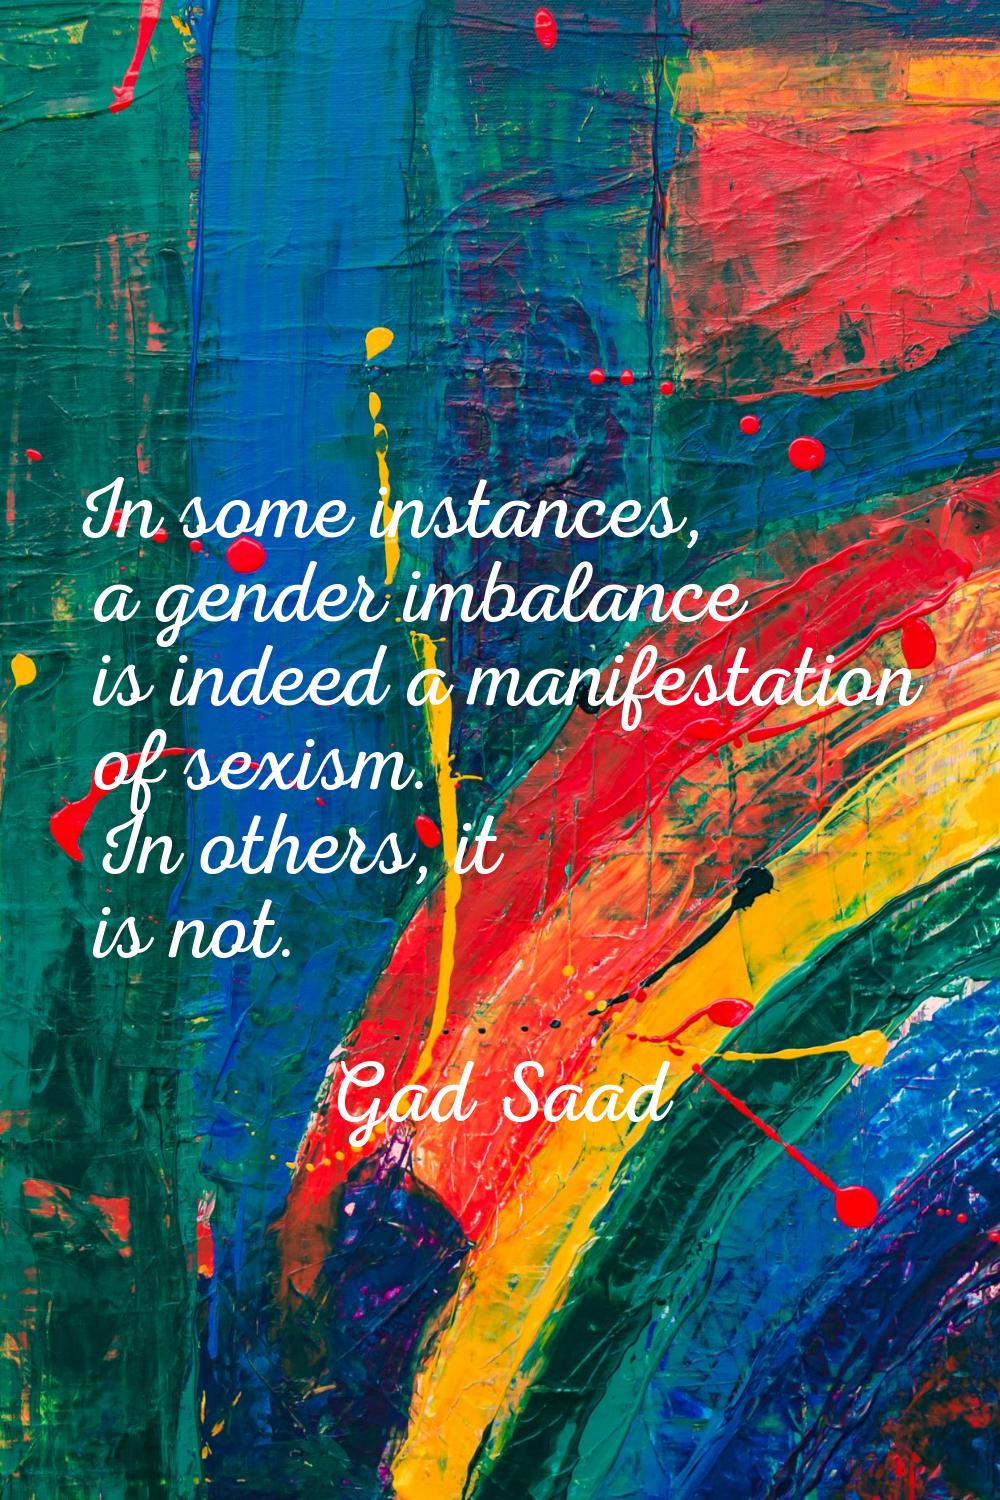 In some instances, a gender imbalance is indeed a manifestation of sexism. In others, it is not.